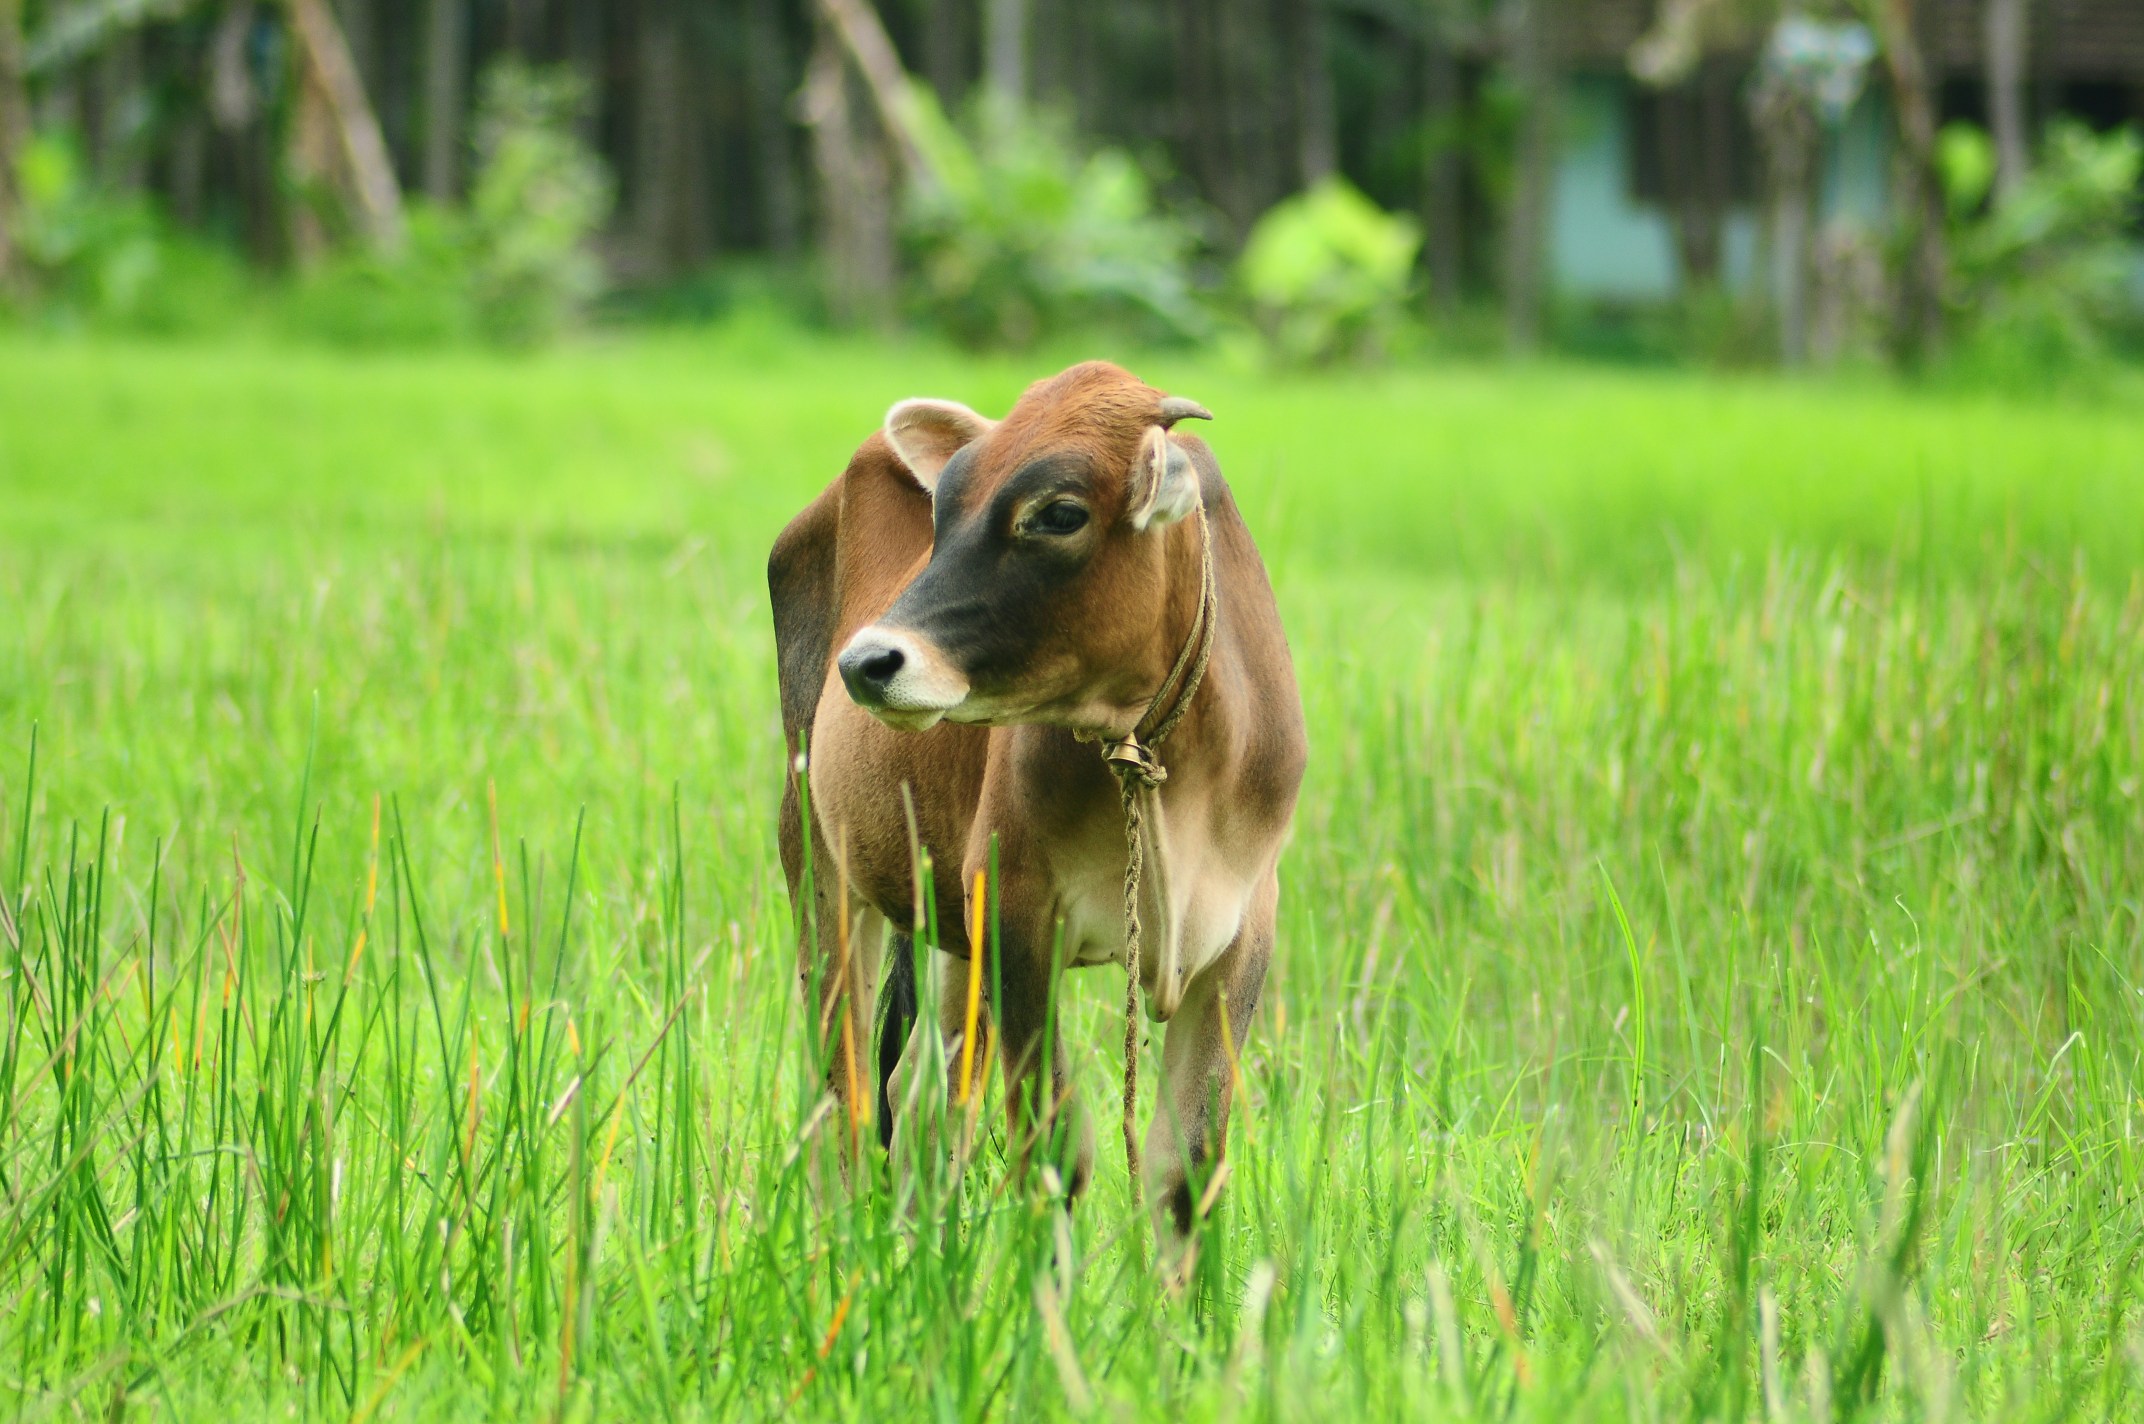 a cow that is standing in some tall grass